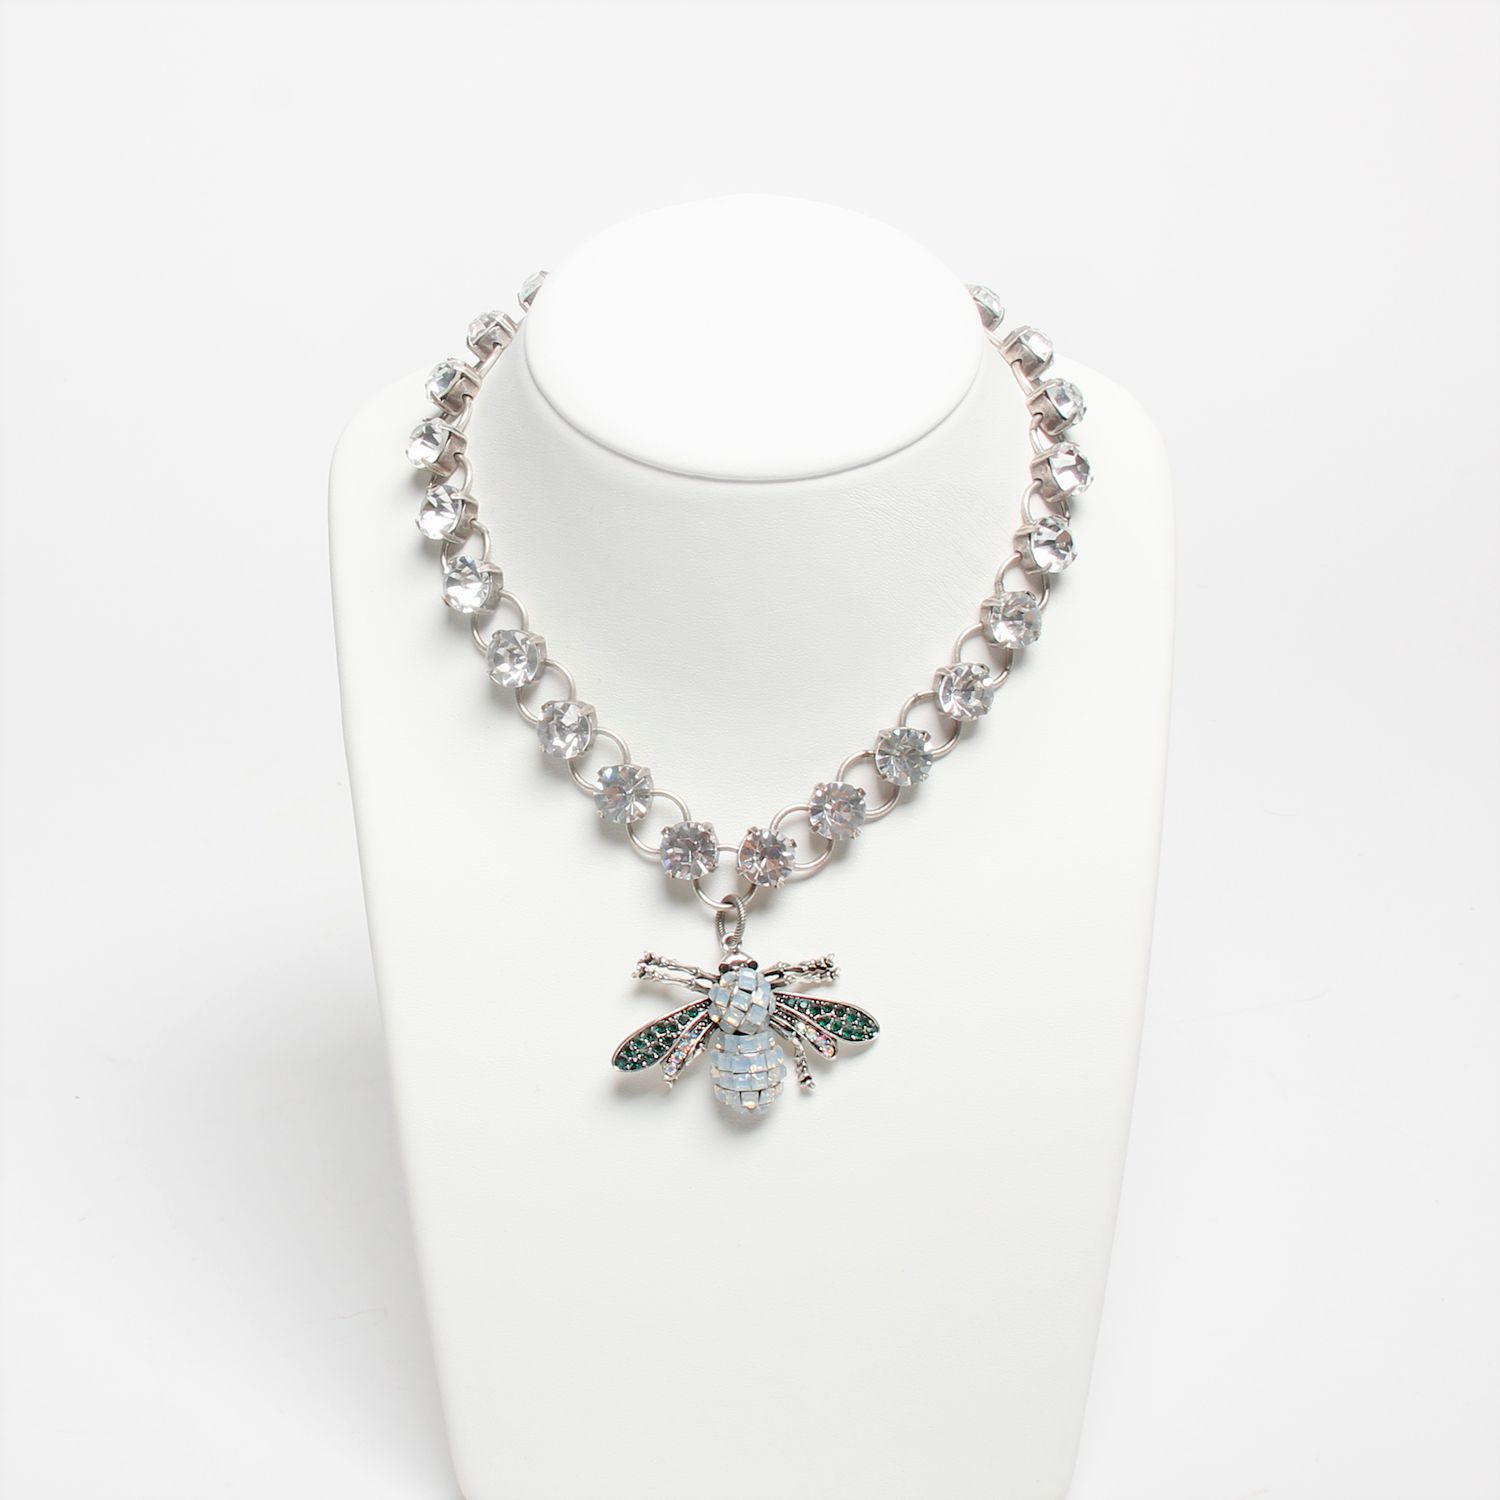 Valentine Rouge: Silver Queen Bee Lariat Necklace Product Image 1 of 5